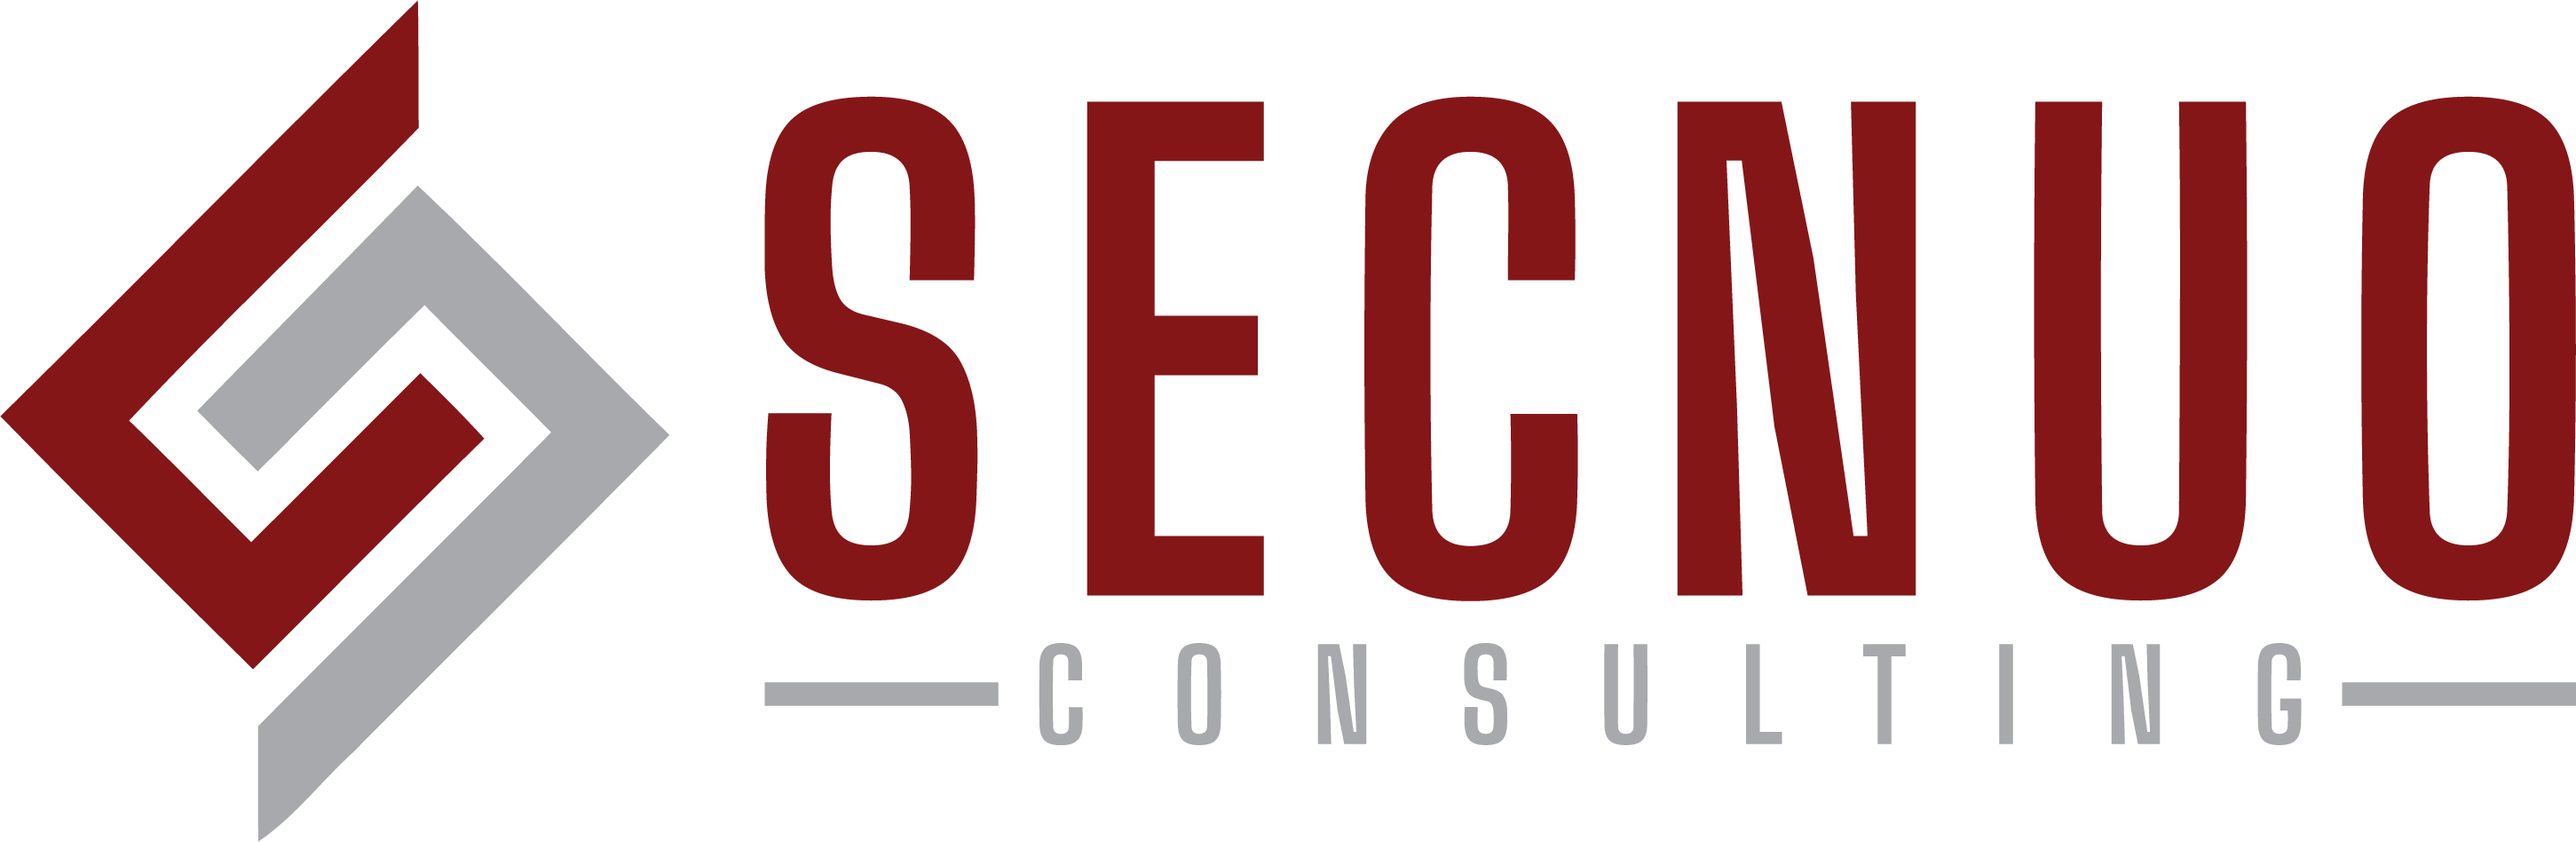 Secnuo Consulting | Cyber Security Services